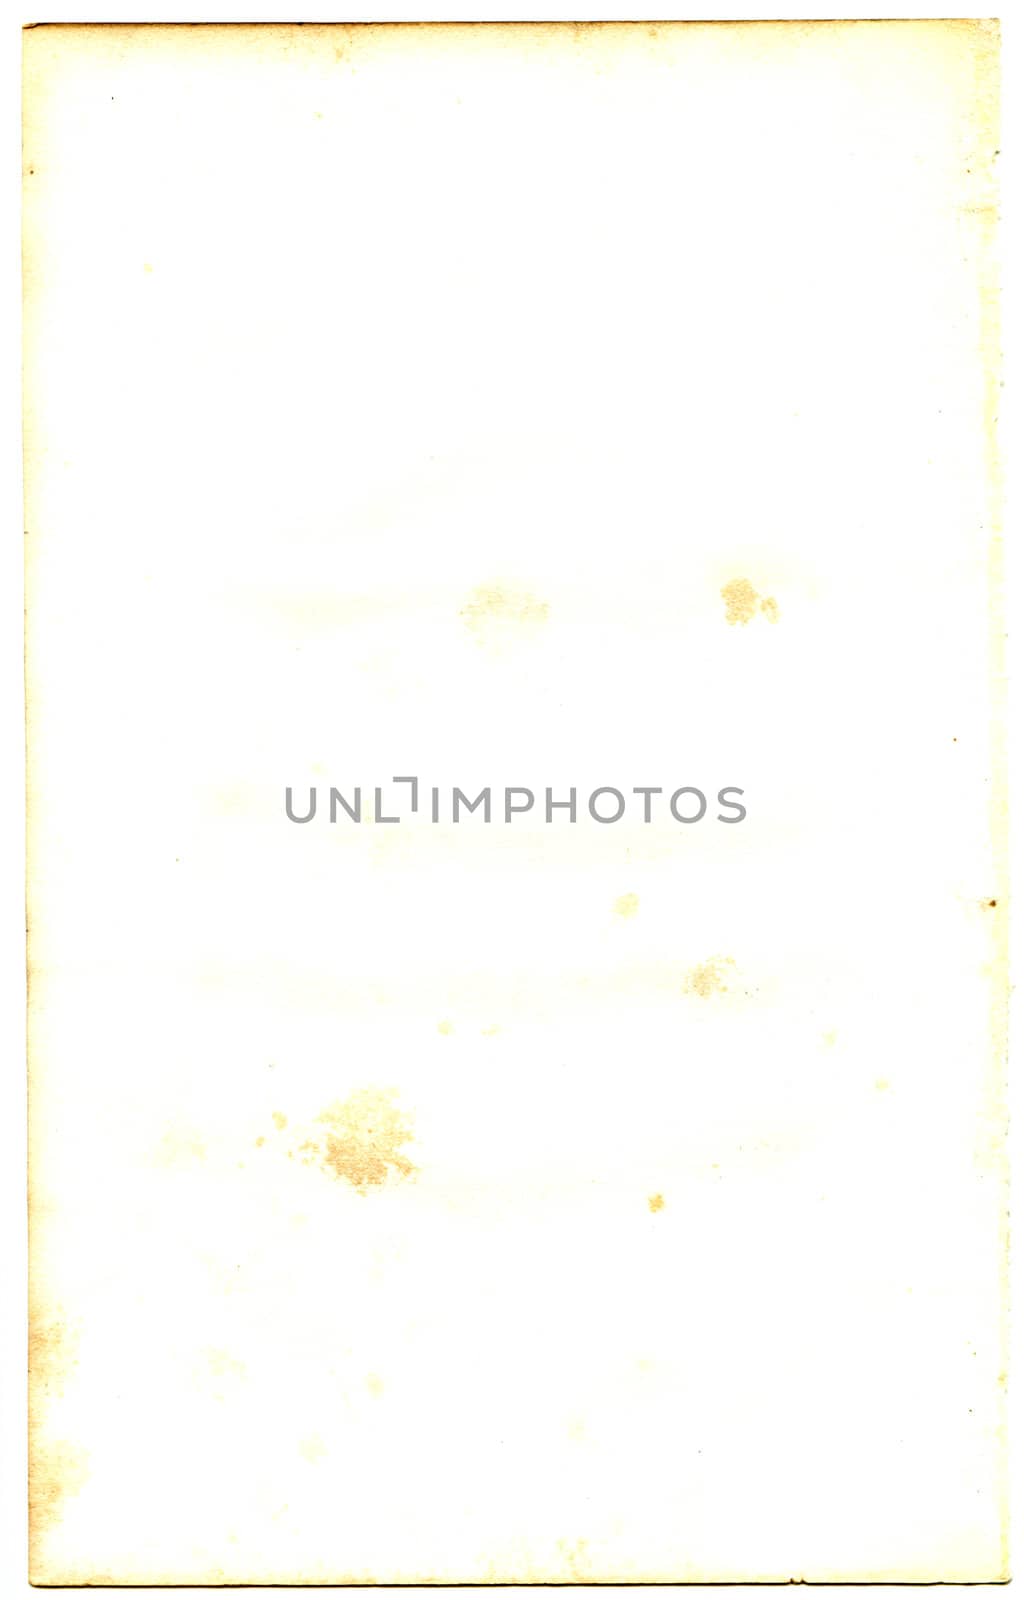 Old antique paper from a book or note pad blank retro background by jeremywhat